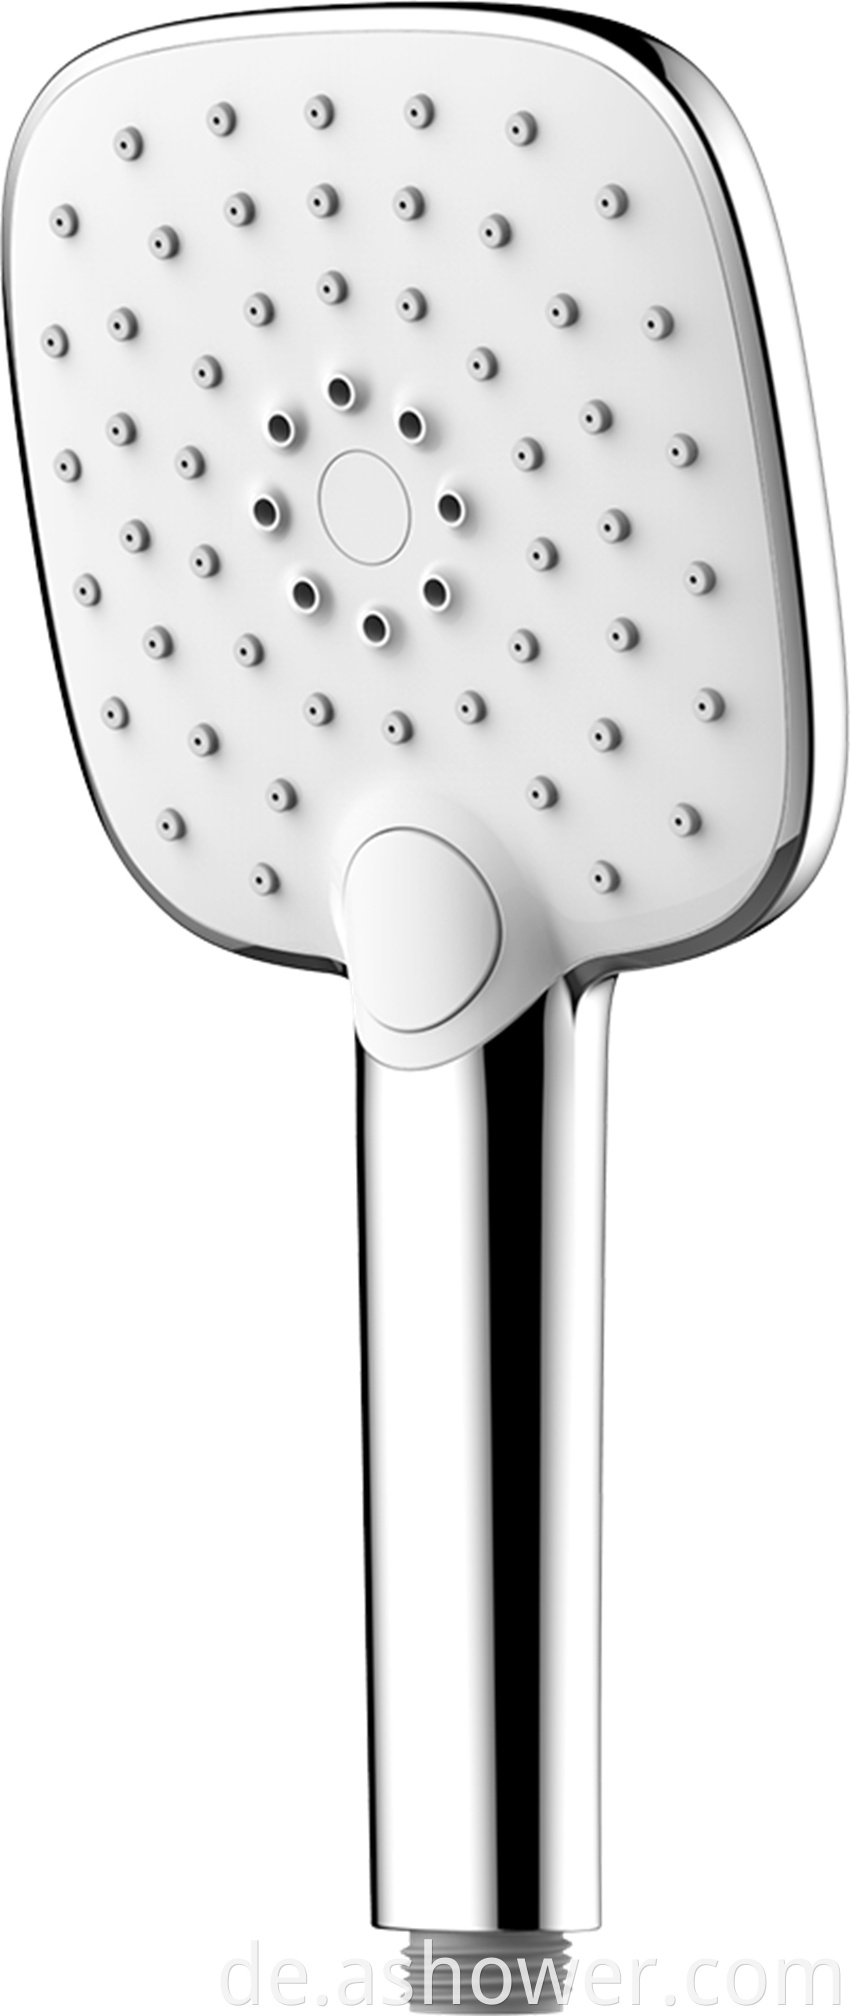 Abs Plastic Three Functions Hand Shower